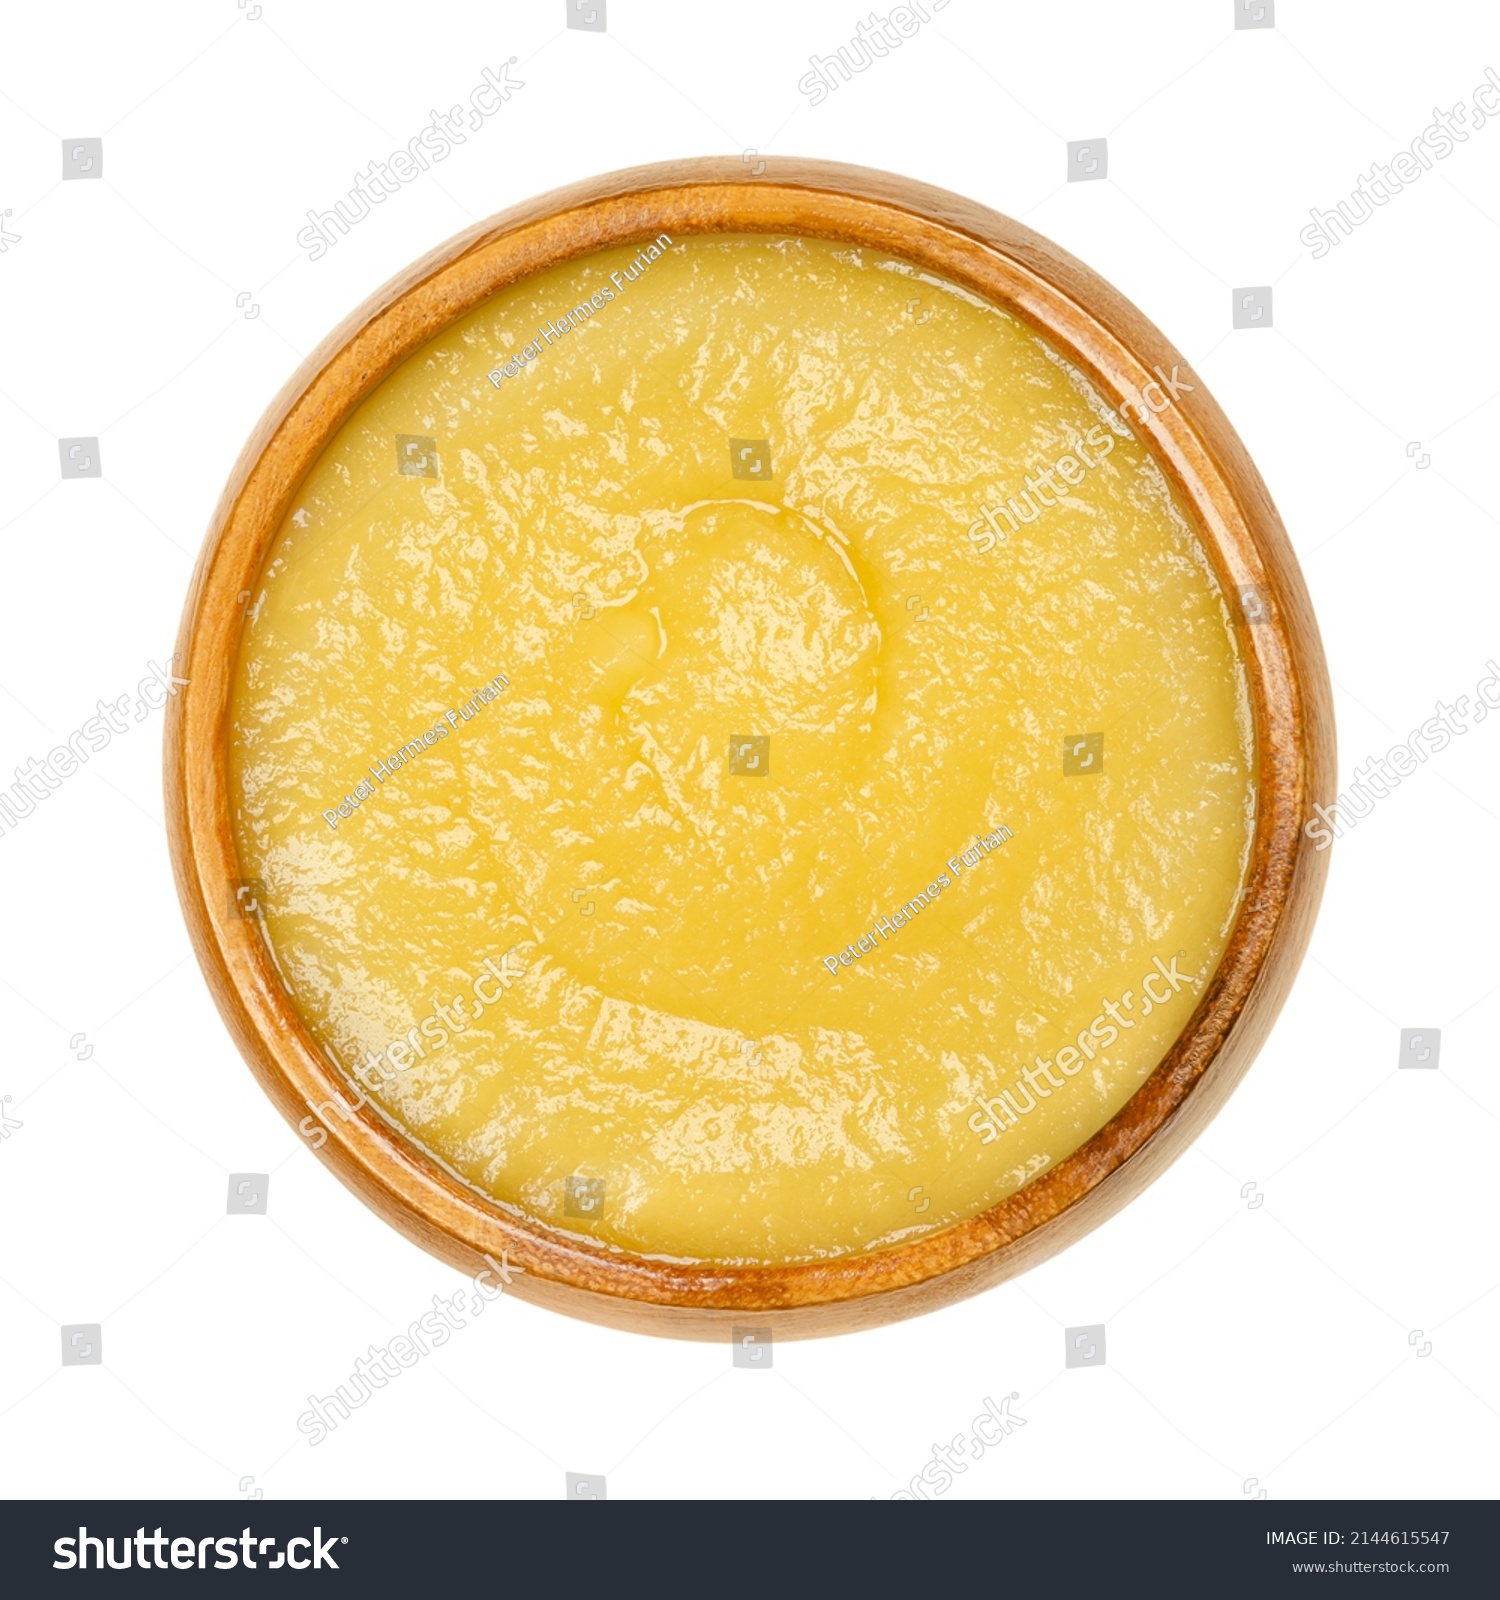 Apple sauce in a wooden bowl. Commercially processed applesauce, a yellow sauce made of peeled and cooked apples. Inexpensive and widely consumed in North America and parts of Europe. Macro food photo #2144615547